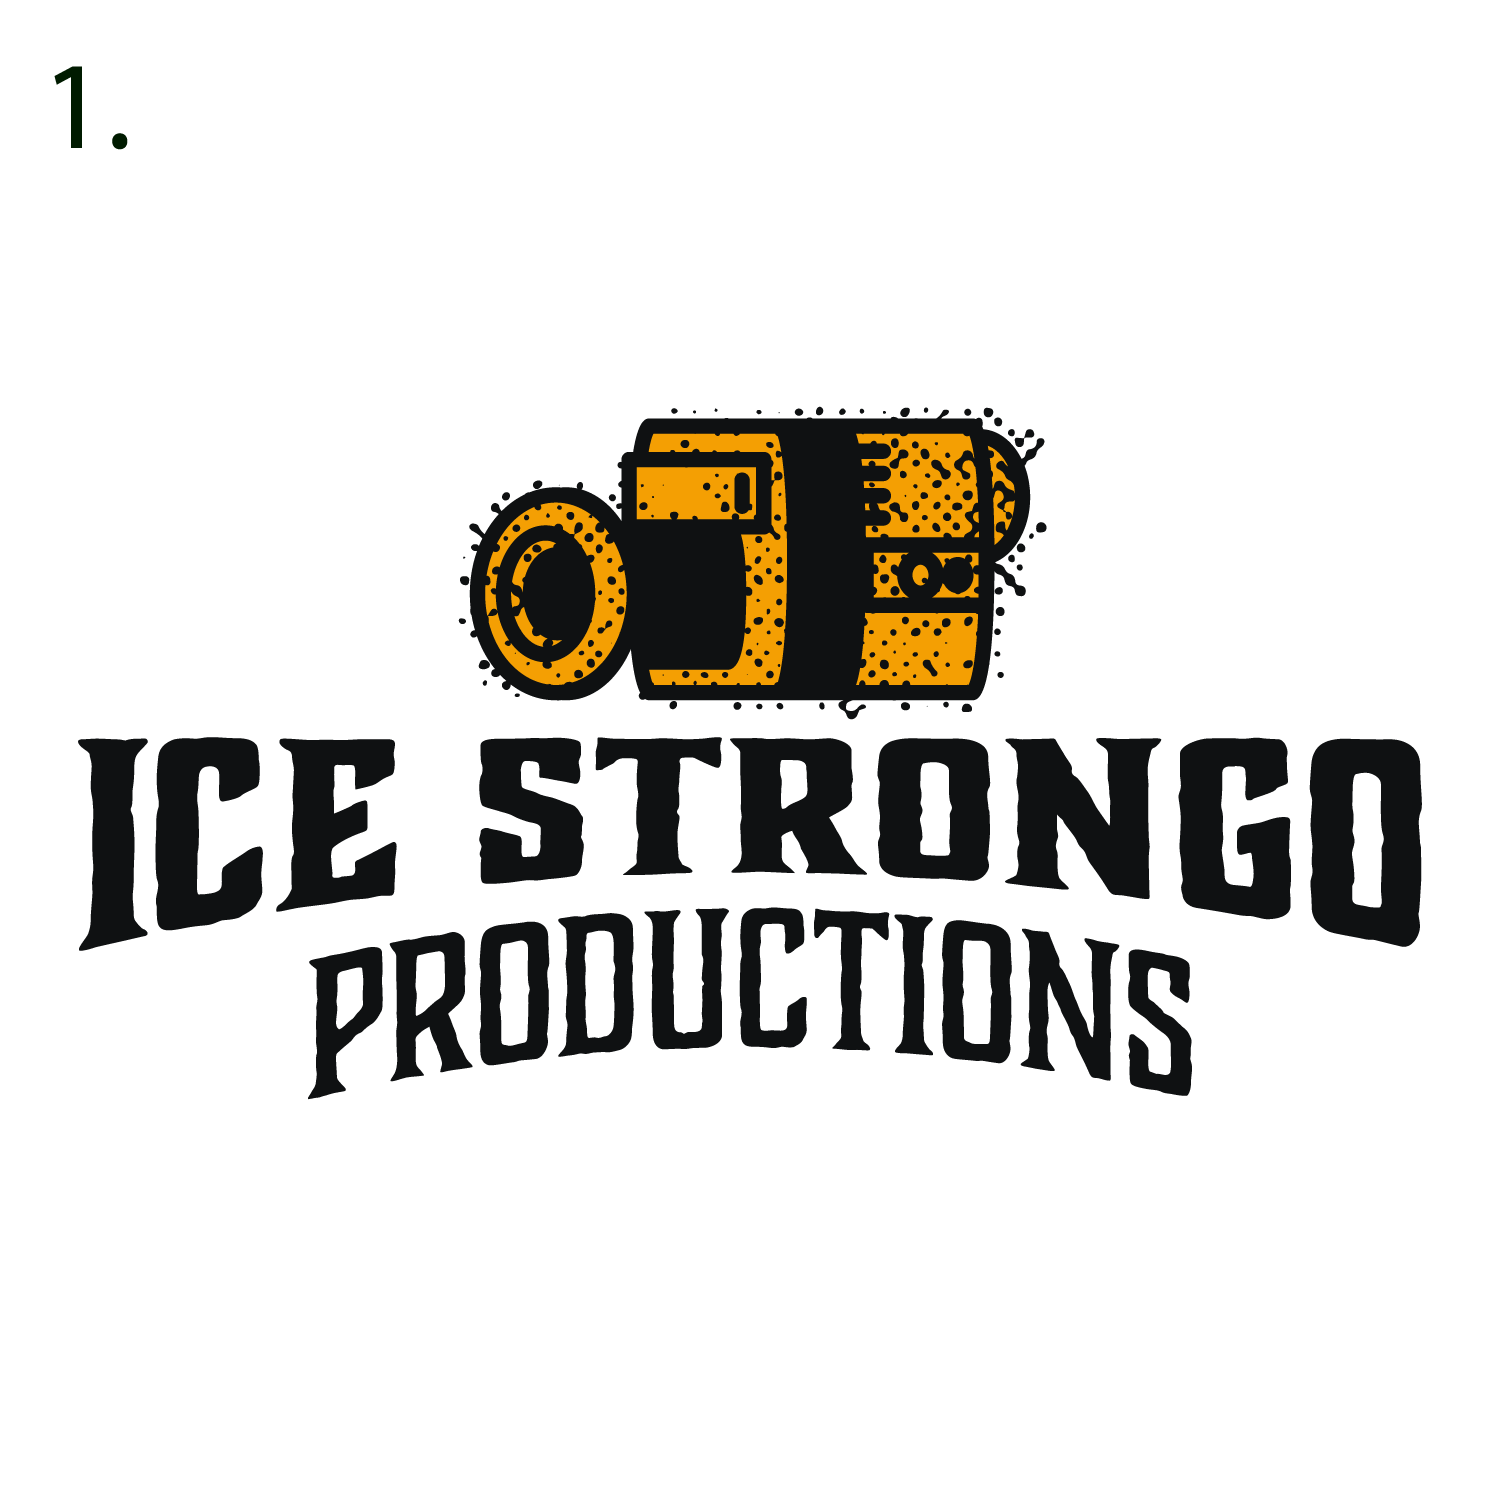 IceStrongo-Productions-LOGO-PROOFv1-01.png